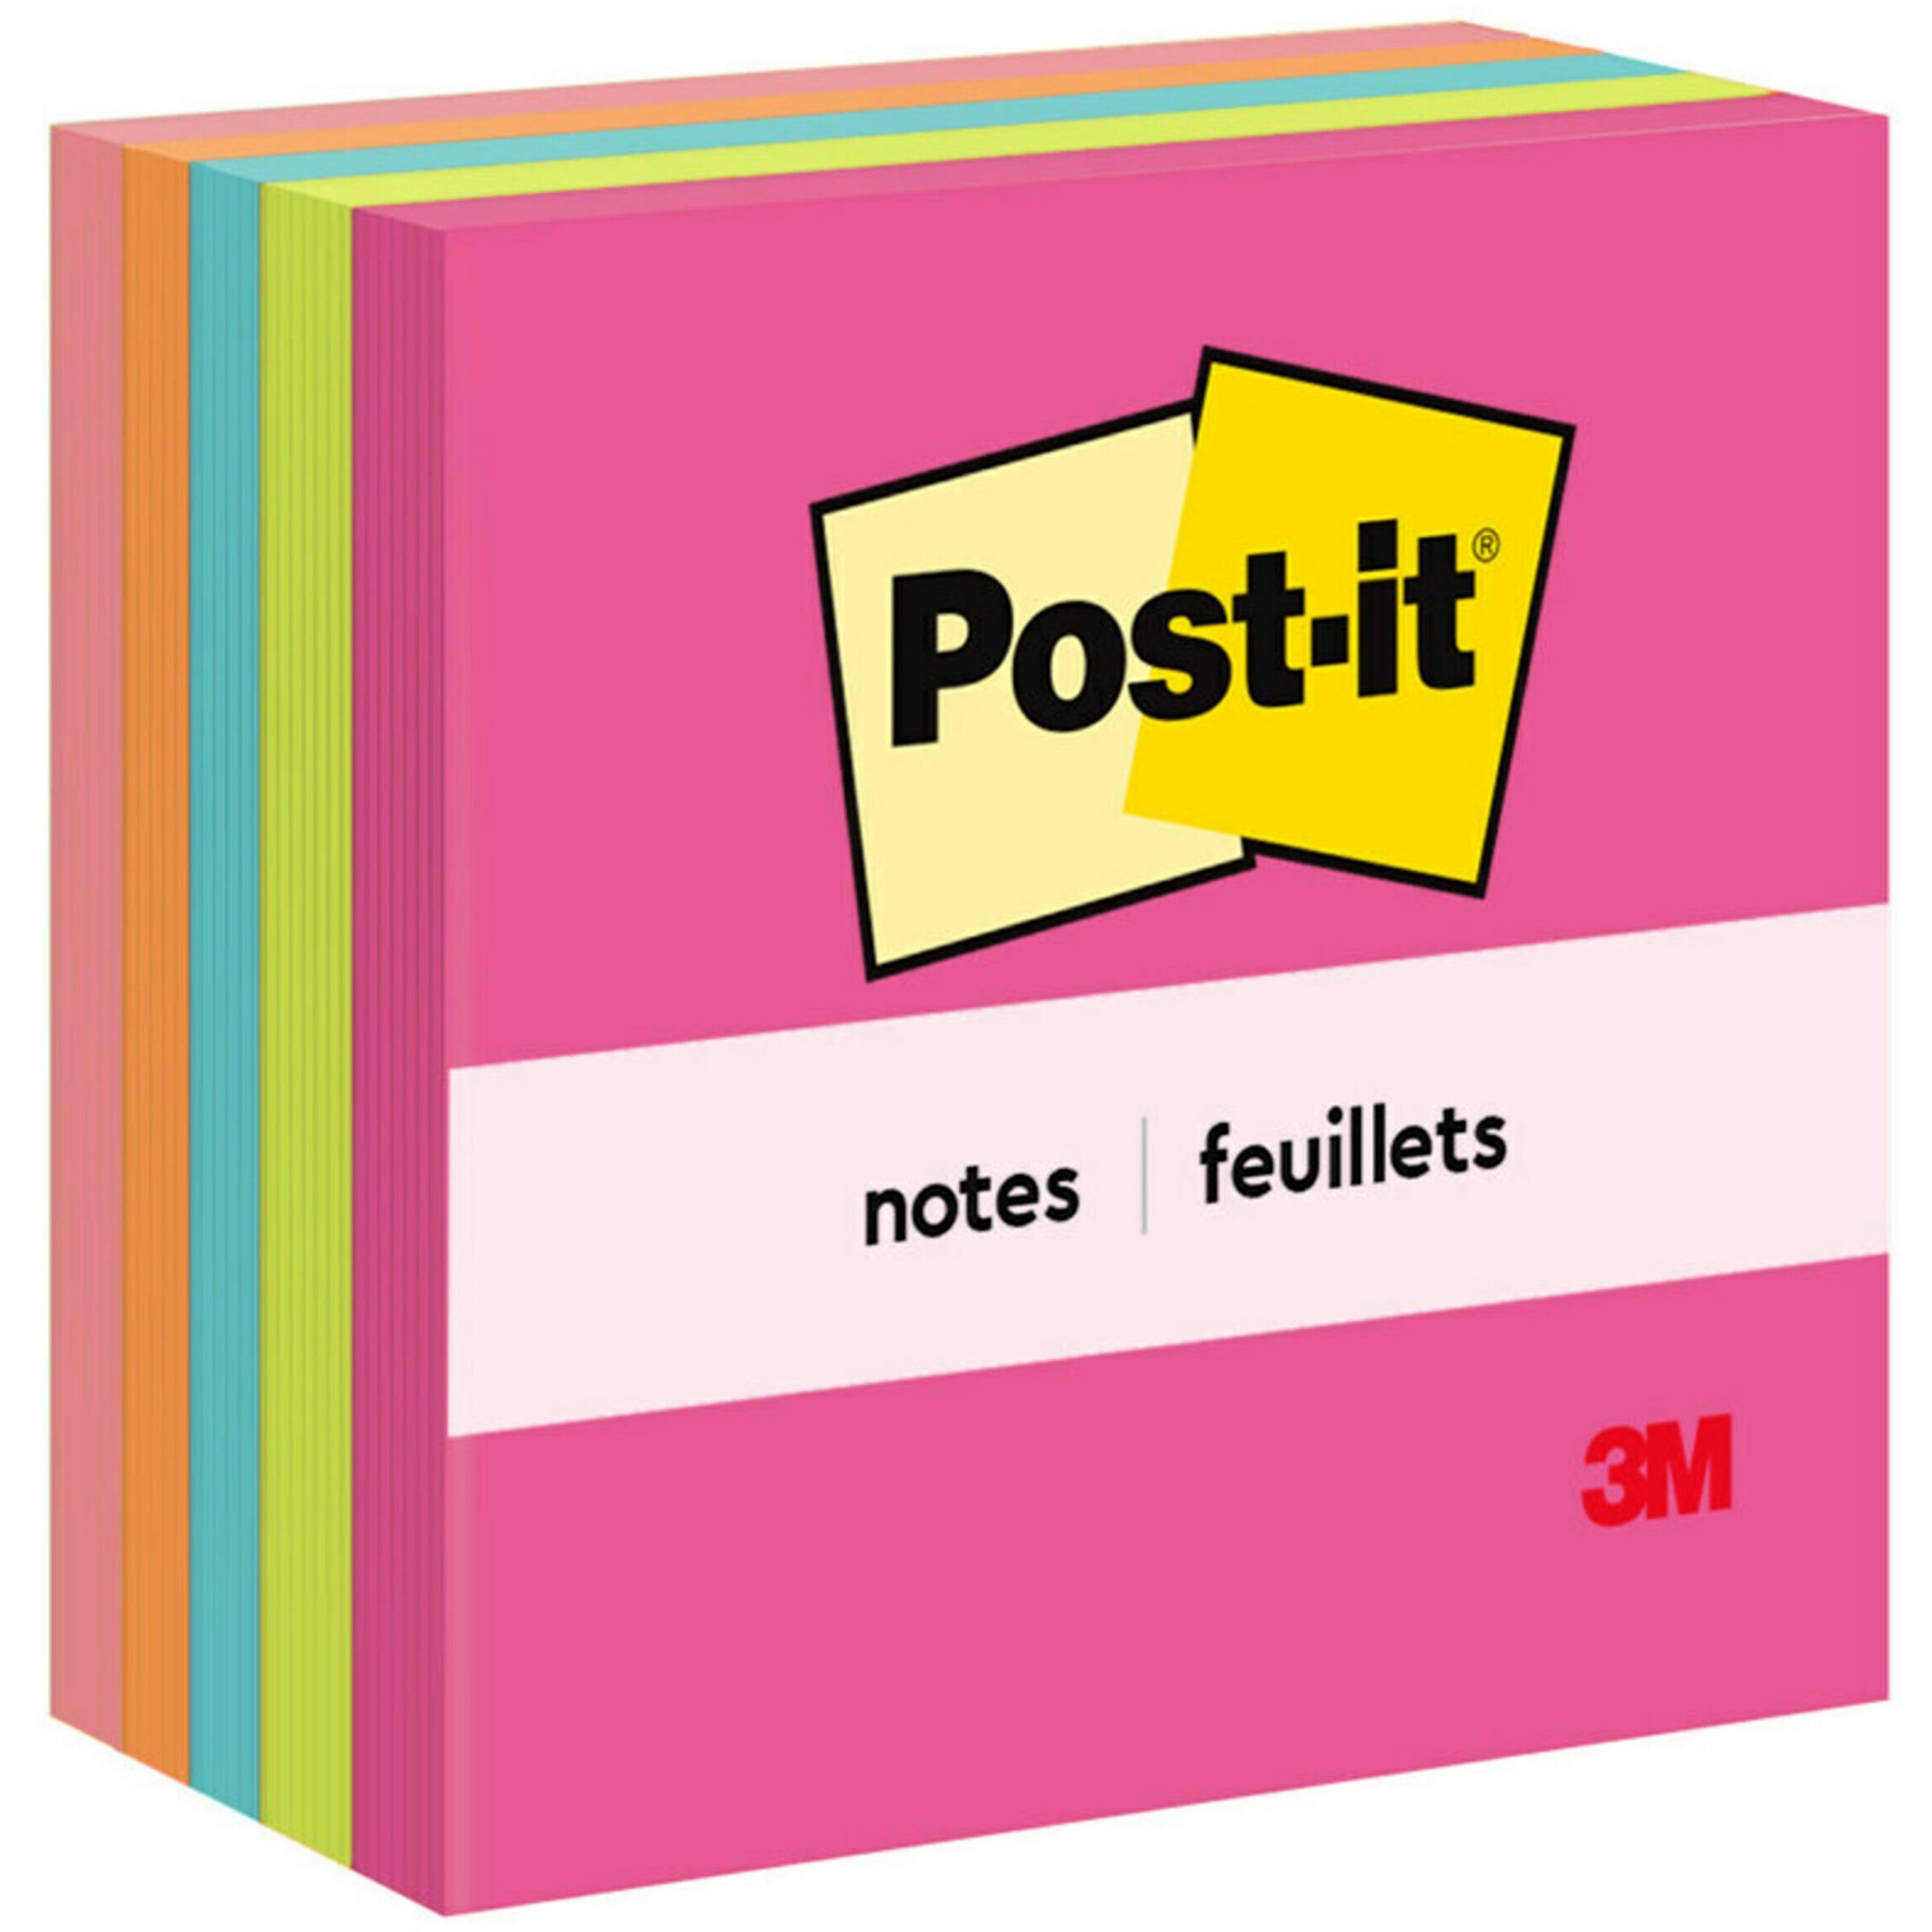 Post-it Super Sticky Notes, 3x3 in, 24 Padspack, 70 Sheetspad,  Exclusive Bright Color Collection, Aqua Splash, Acid Lime, Tropical Pink and